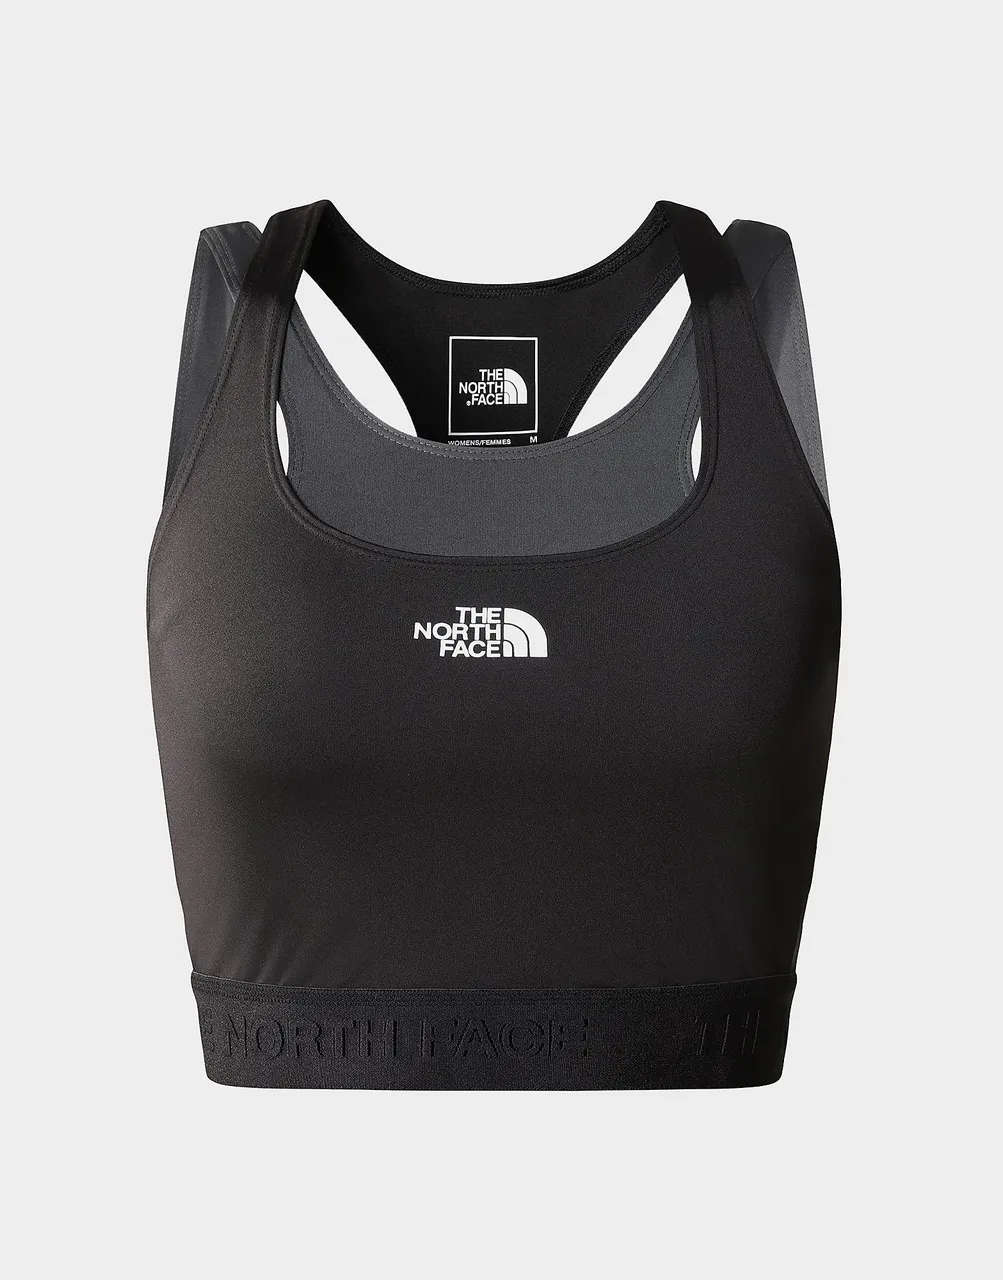 The North Face Tech Tank Top - Black - Womens